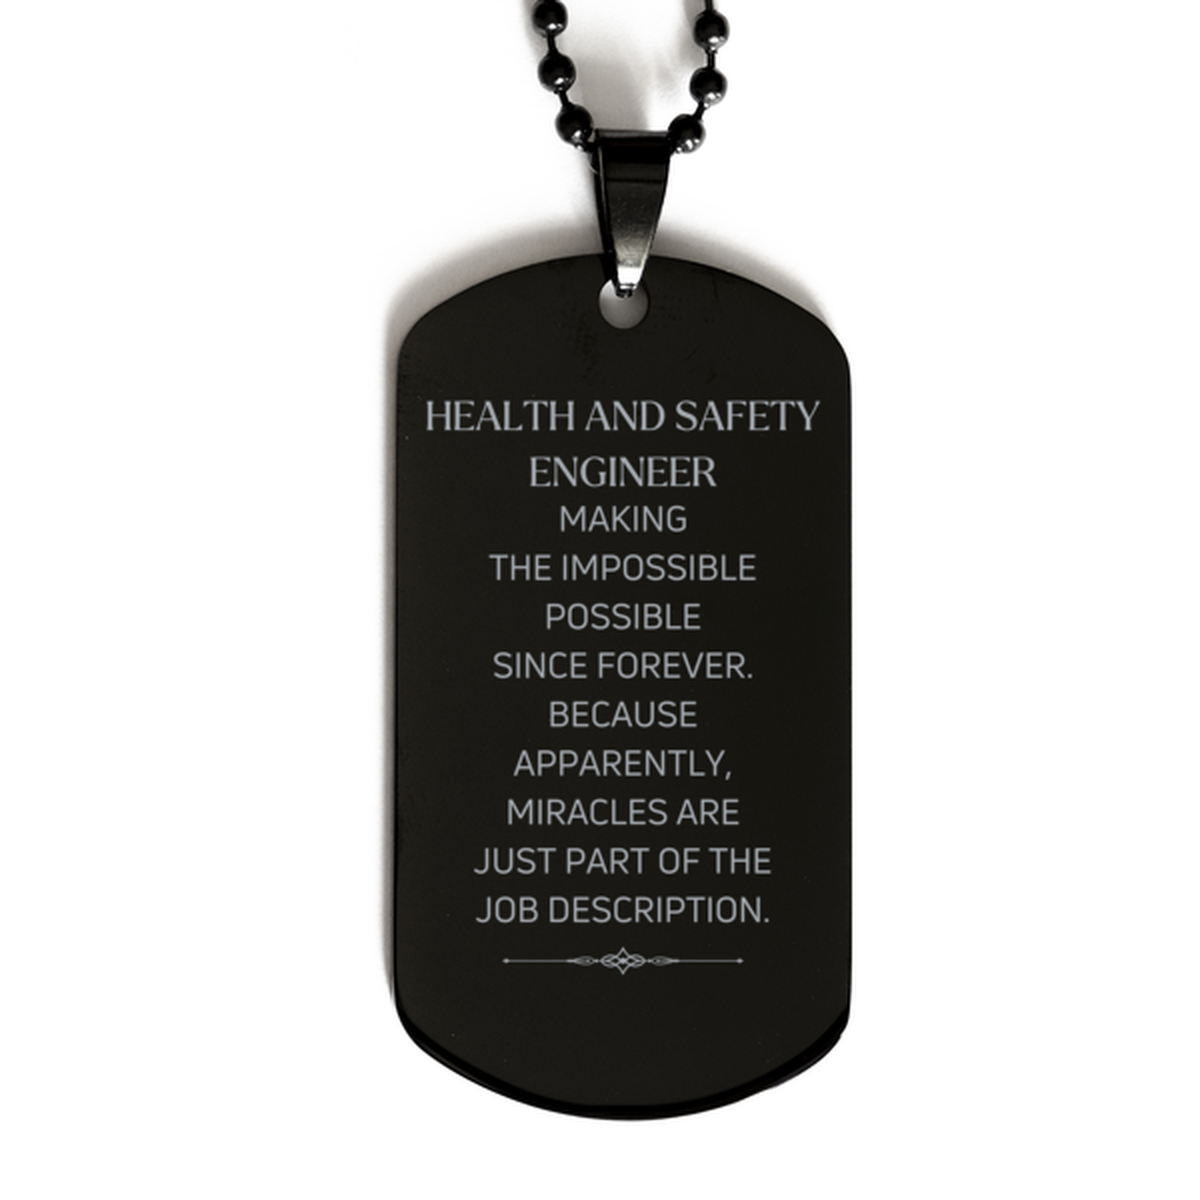 Funny Health and Safety Engineer Gifts, Miracles are just part of the job description, Inspirational Birthday Black Dog Tag For Health and Safety Engineer, Men, Women, Coworkers, Friends, Boss